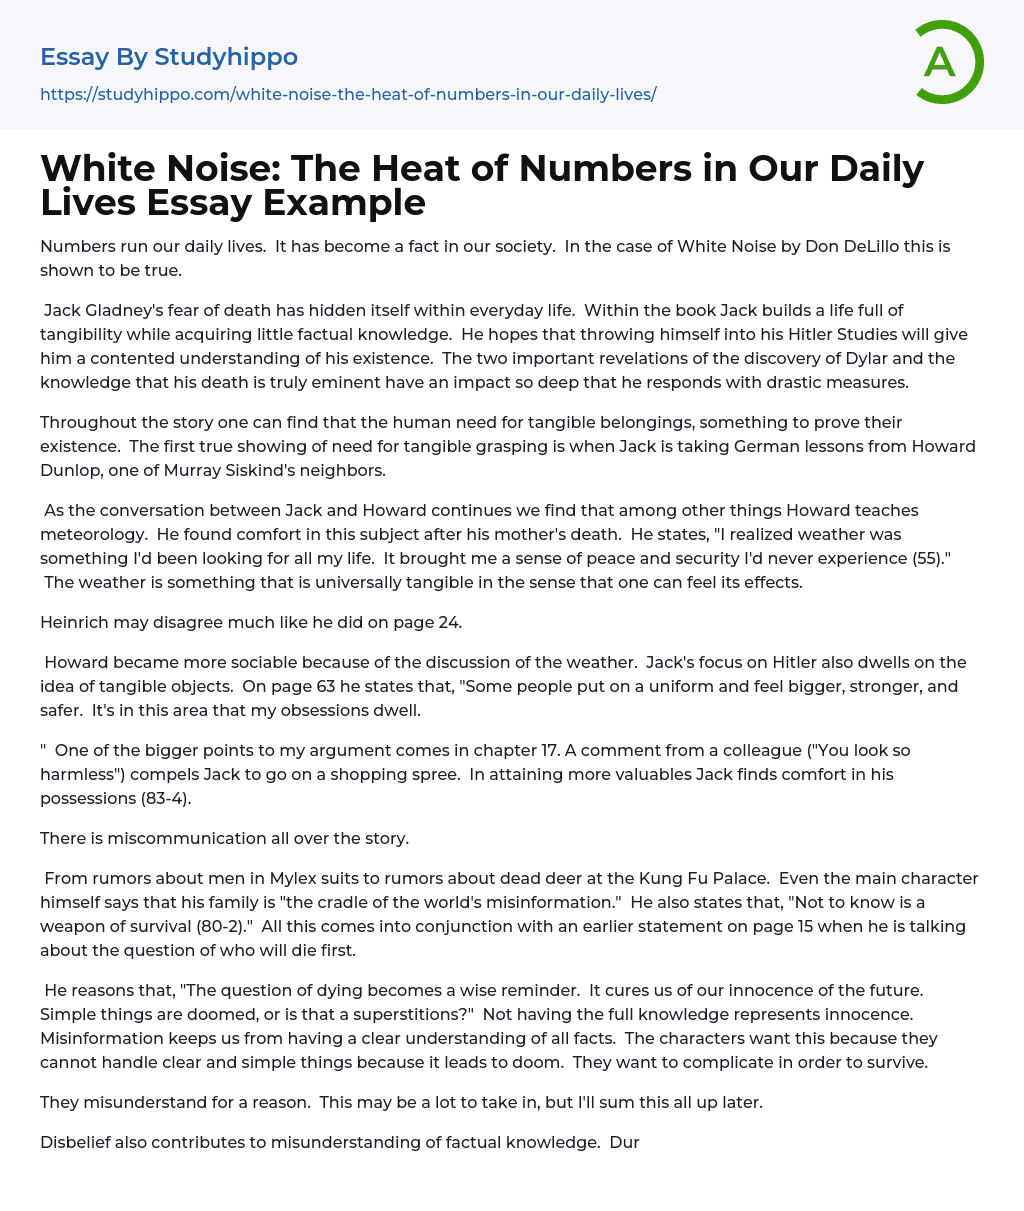 White Noise: The Heat of Numbers in Our Daily Lives Essay Example